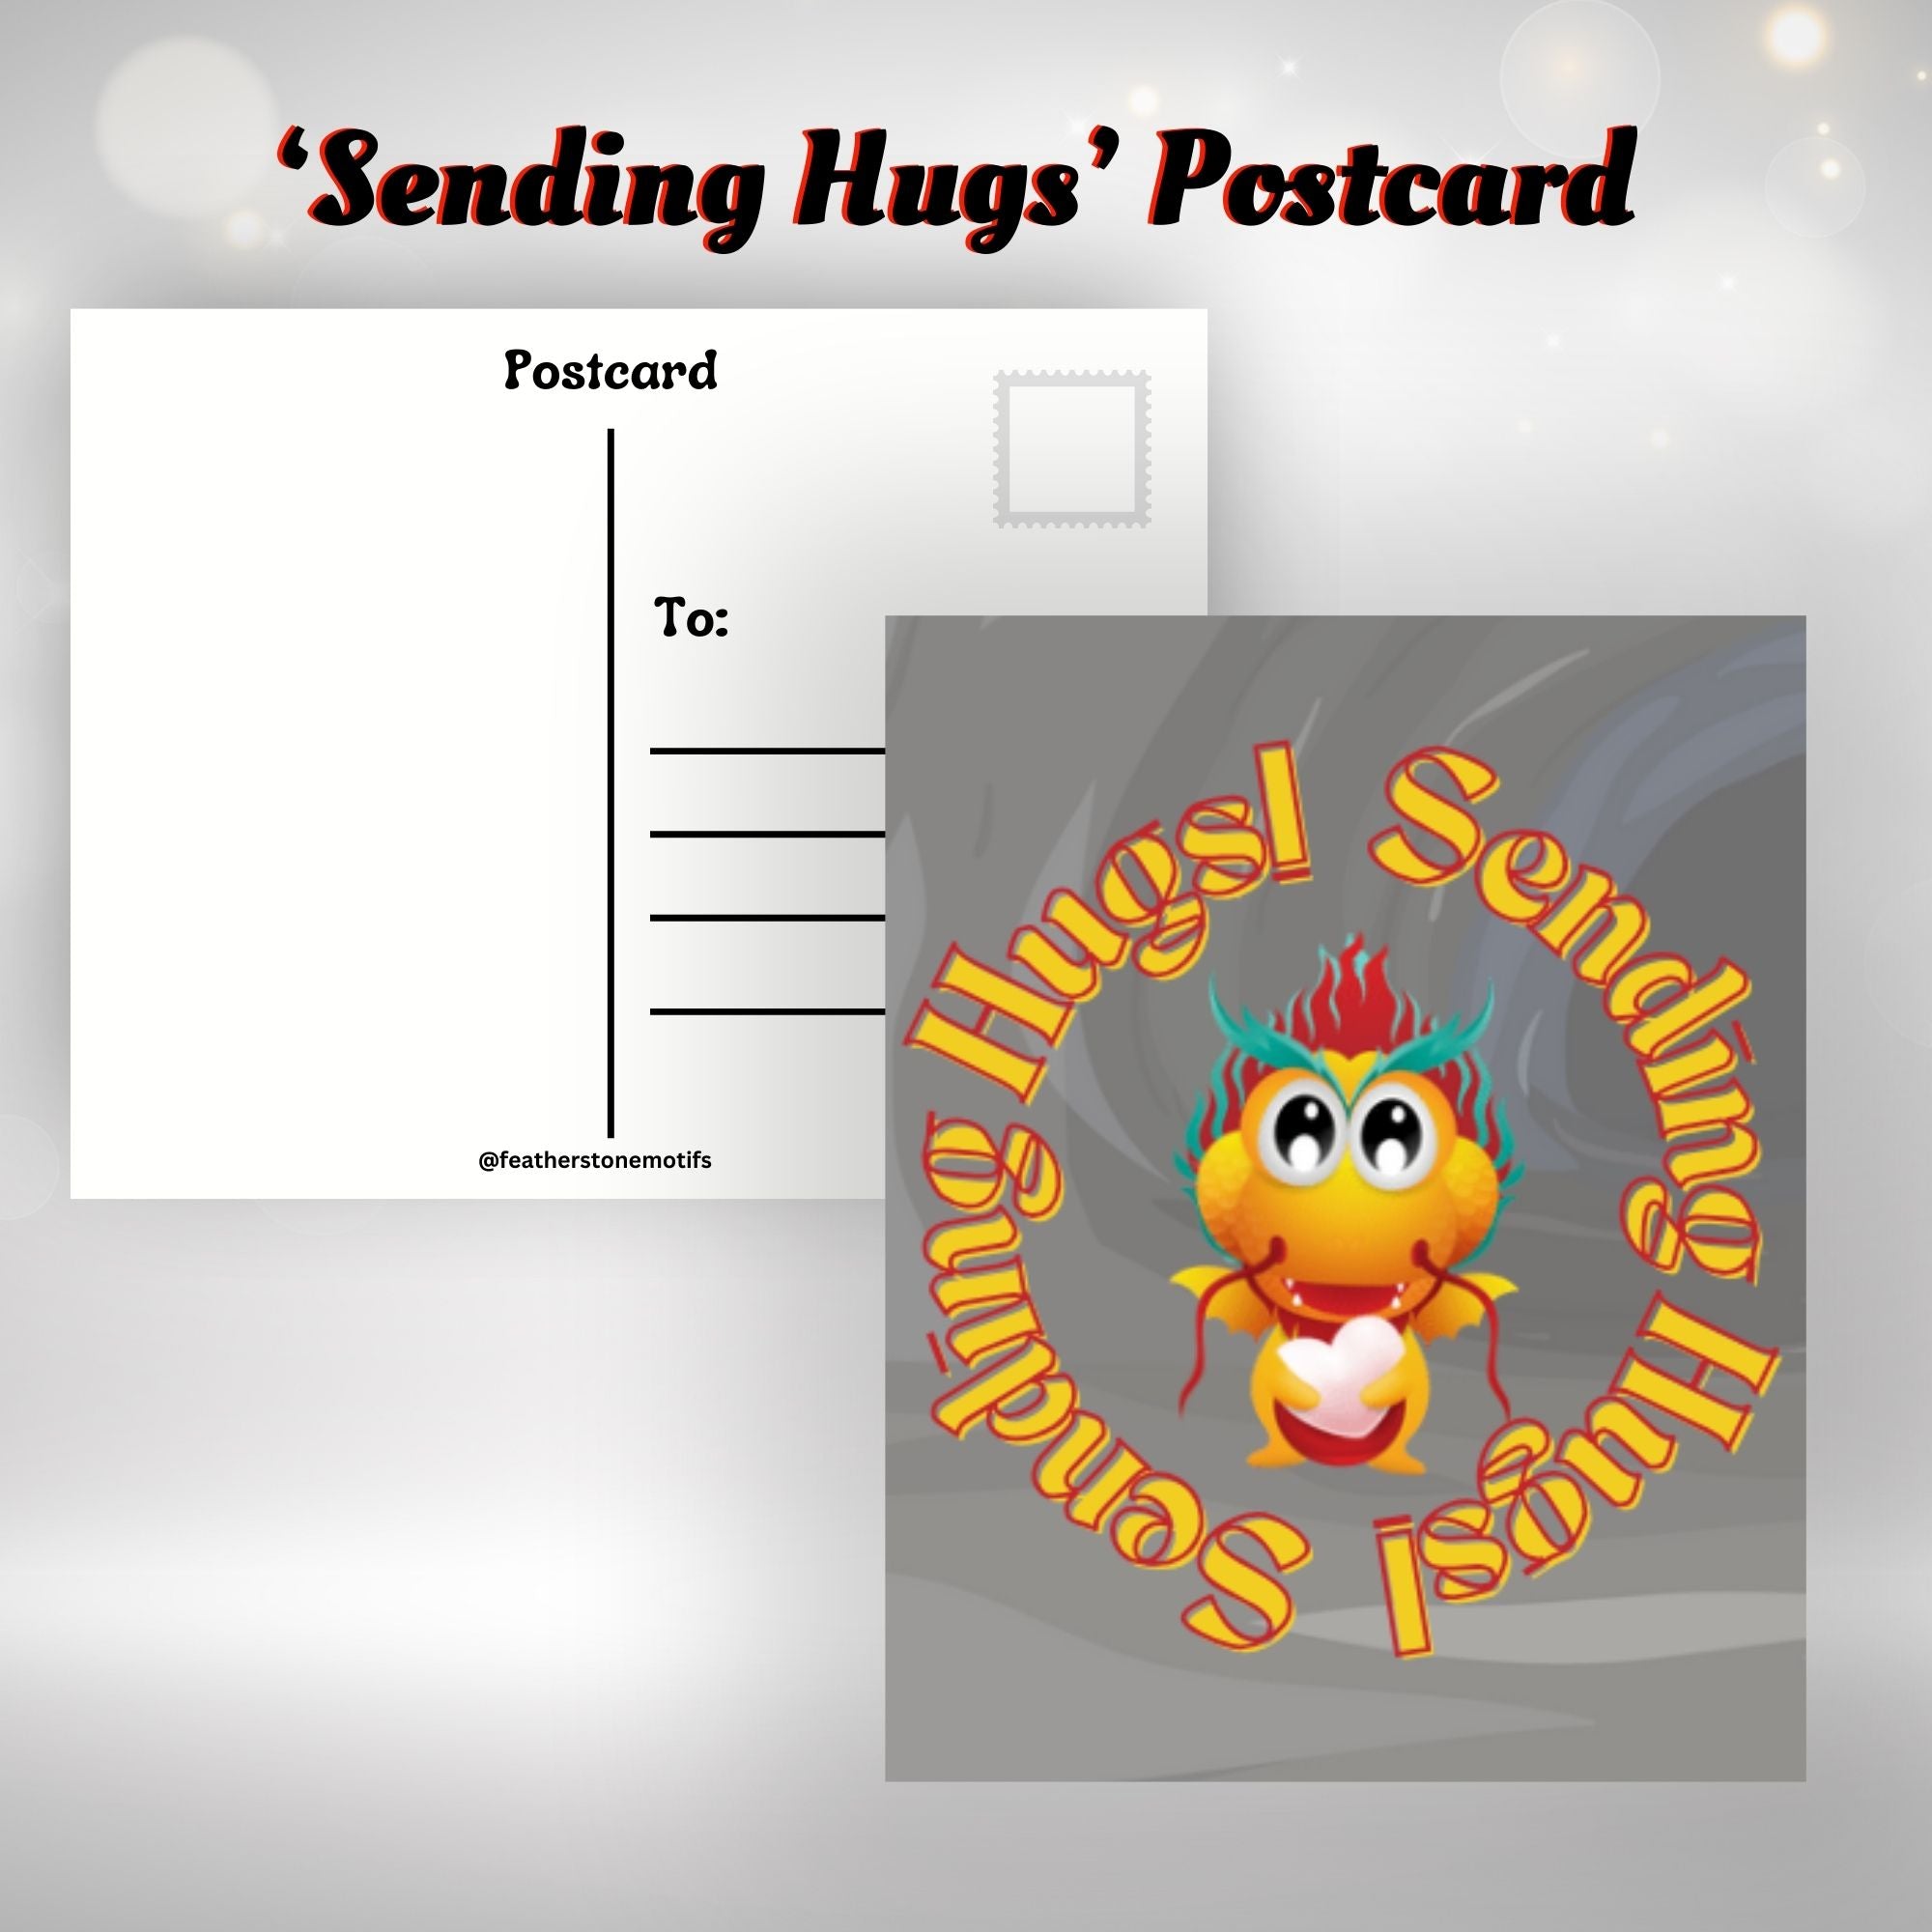 This image shows the Sending Hugs postcard with a yellow dragon on the front.